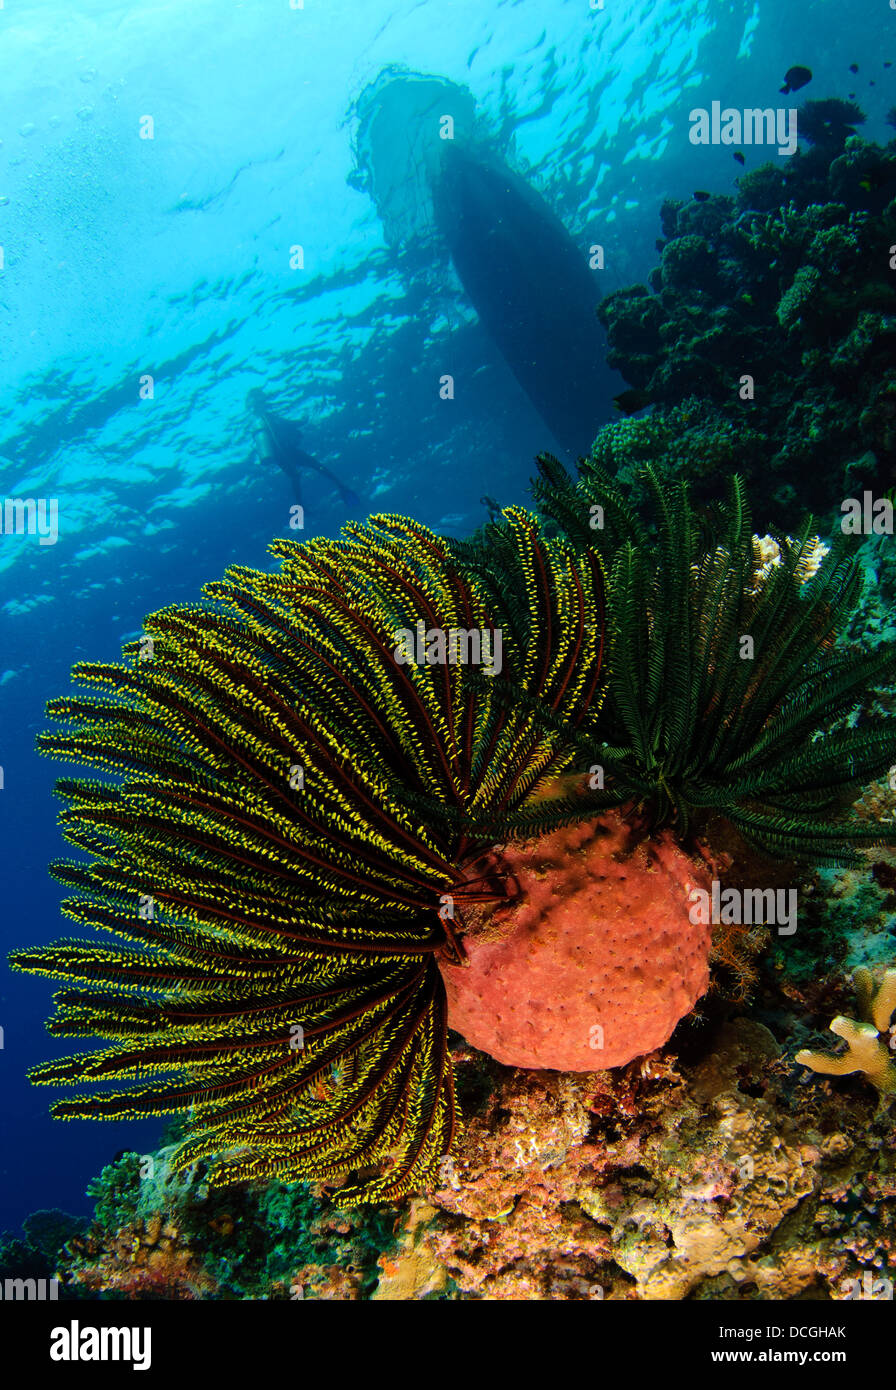 Variable bushy feather star (Comaster schlegelii) with boat in the background, Gorontalo, Sulawesi, Indonesia. Stock Photo